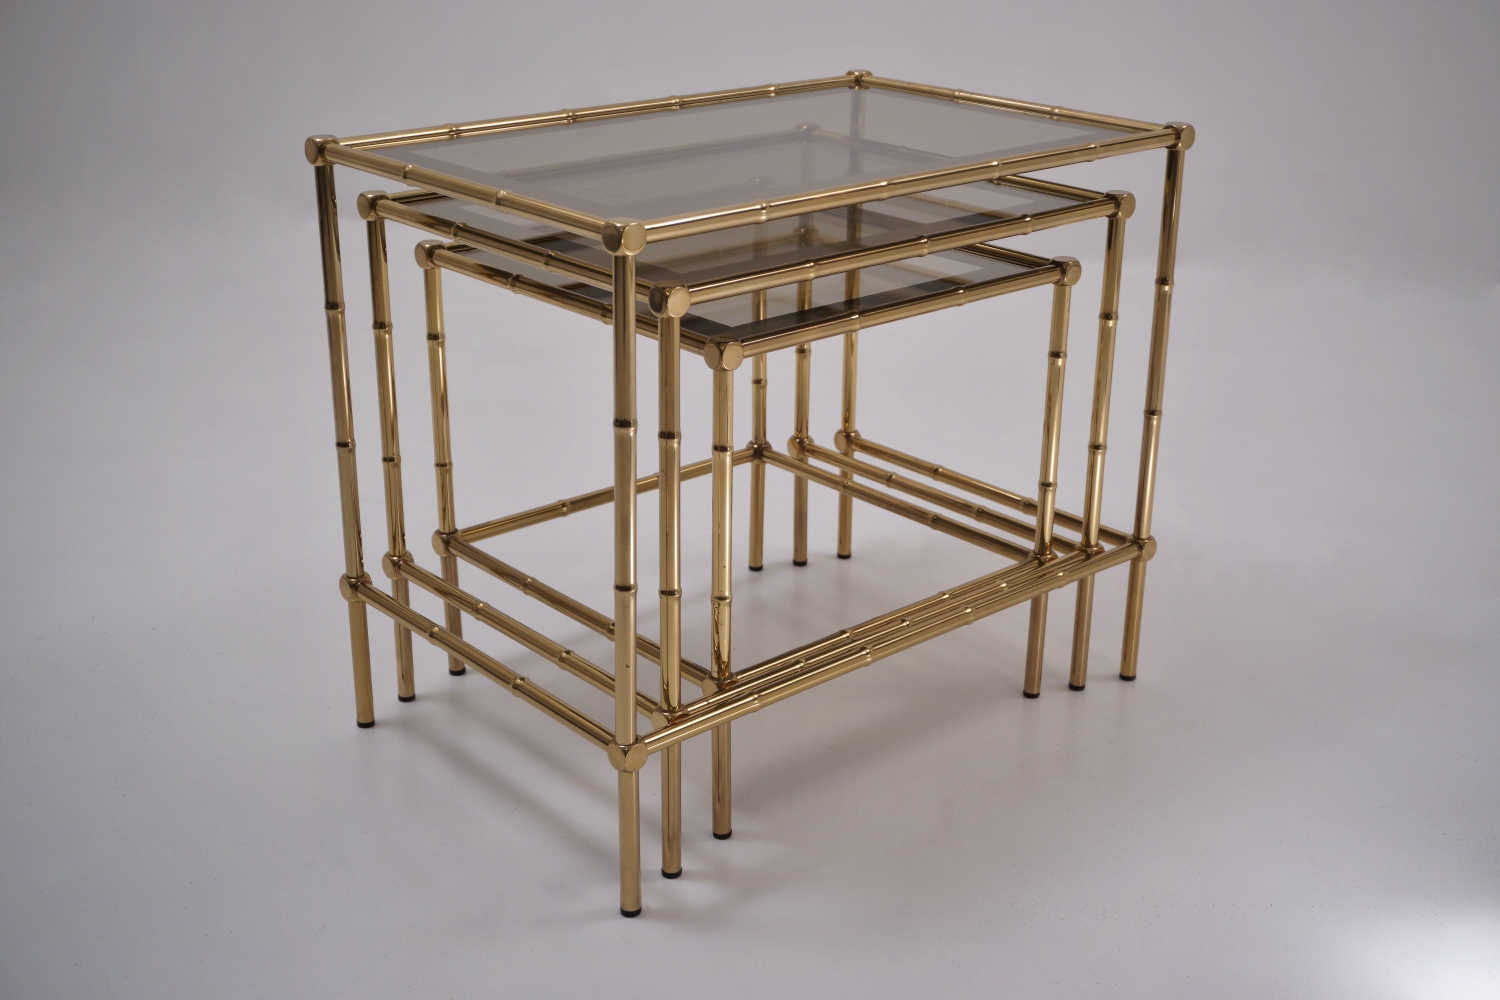 Maison Bagues Style Mid Century Brass and Glass Faux Bamboo Nesting Tables  – Set of 3, Mid Century Modern Furniture